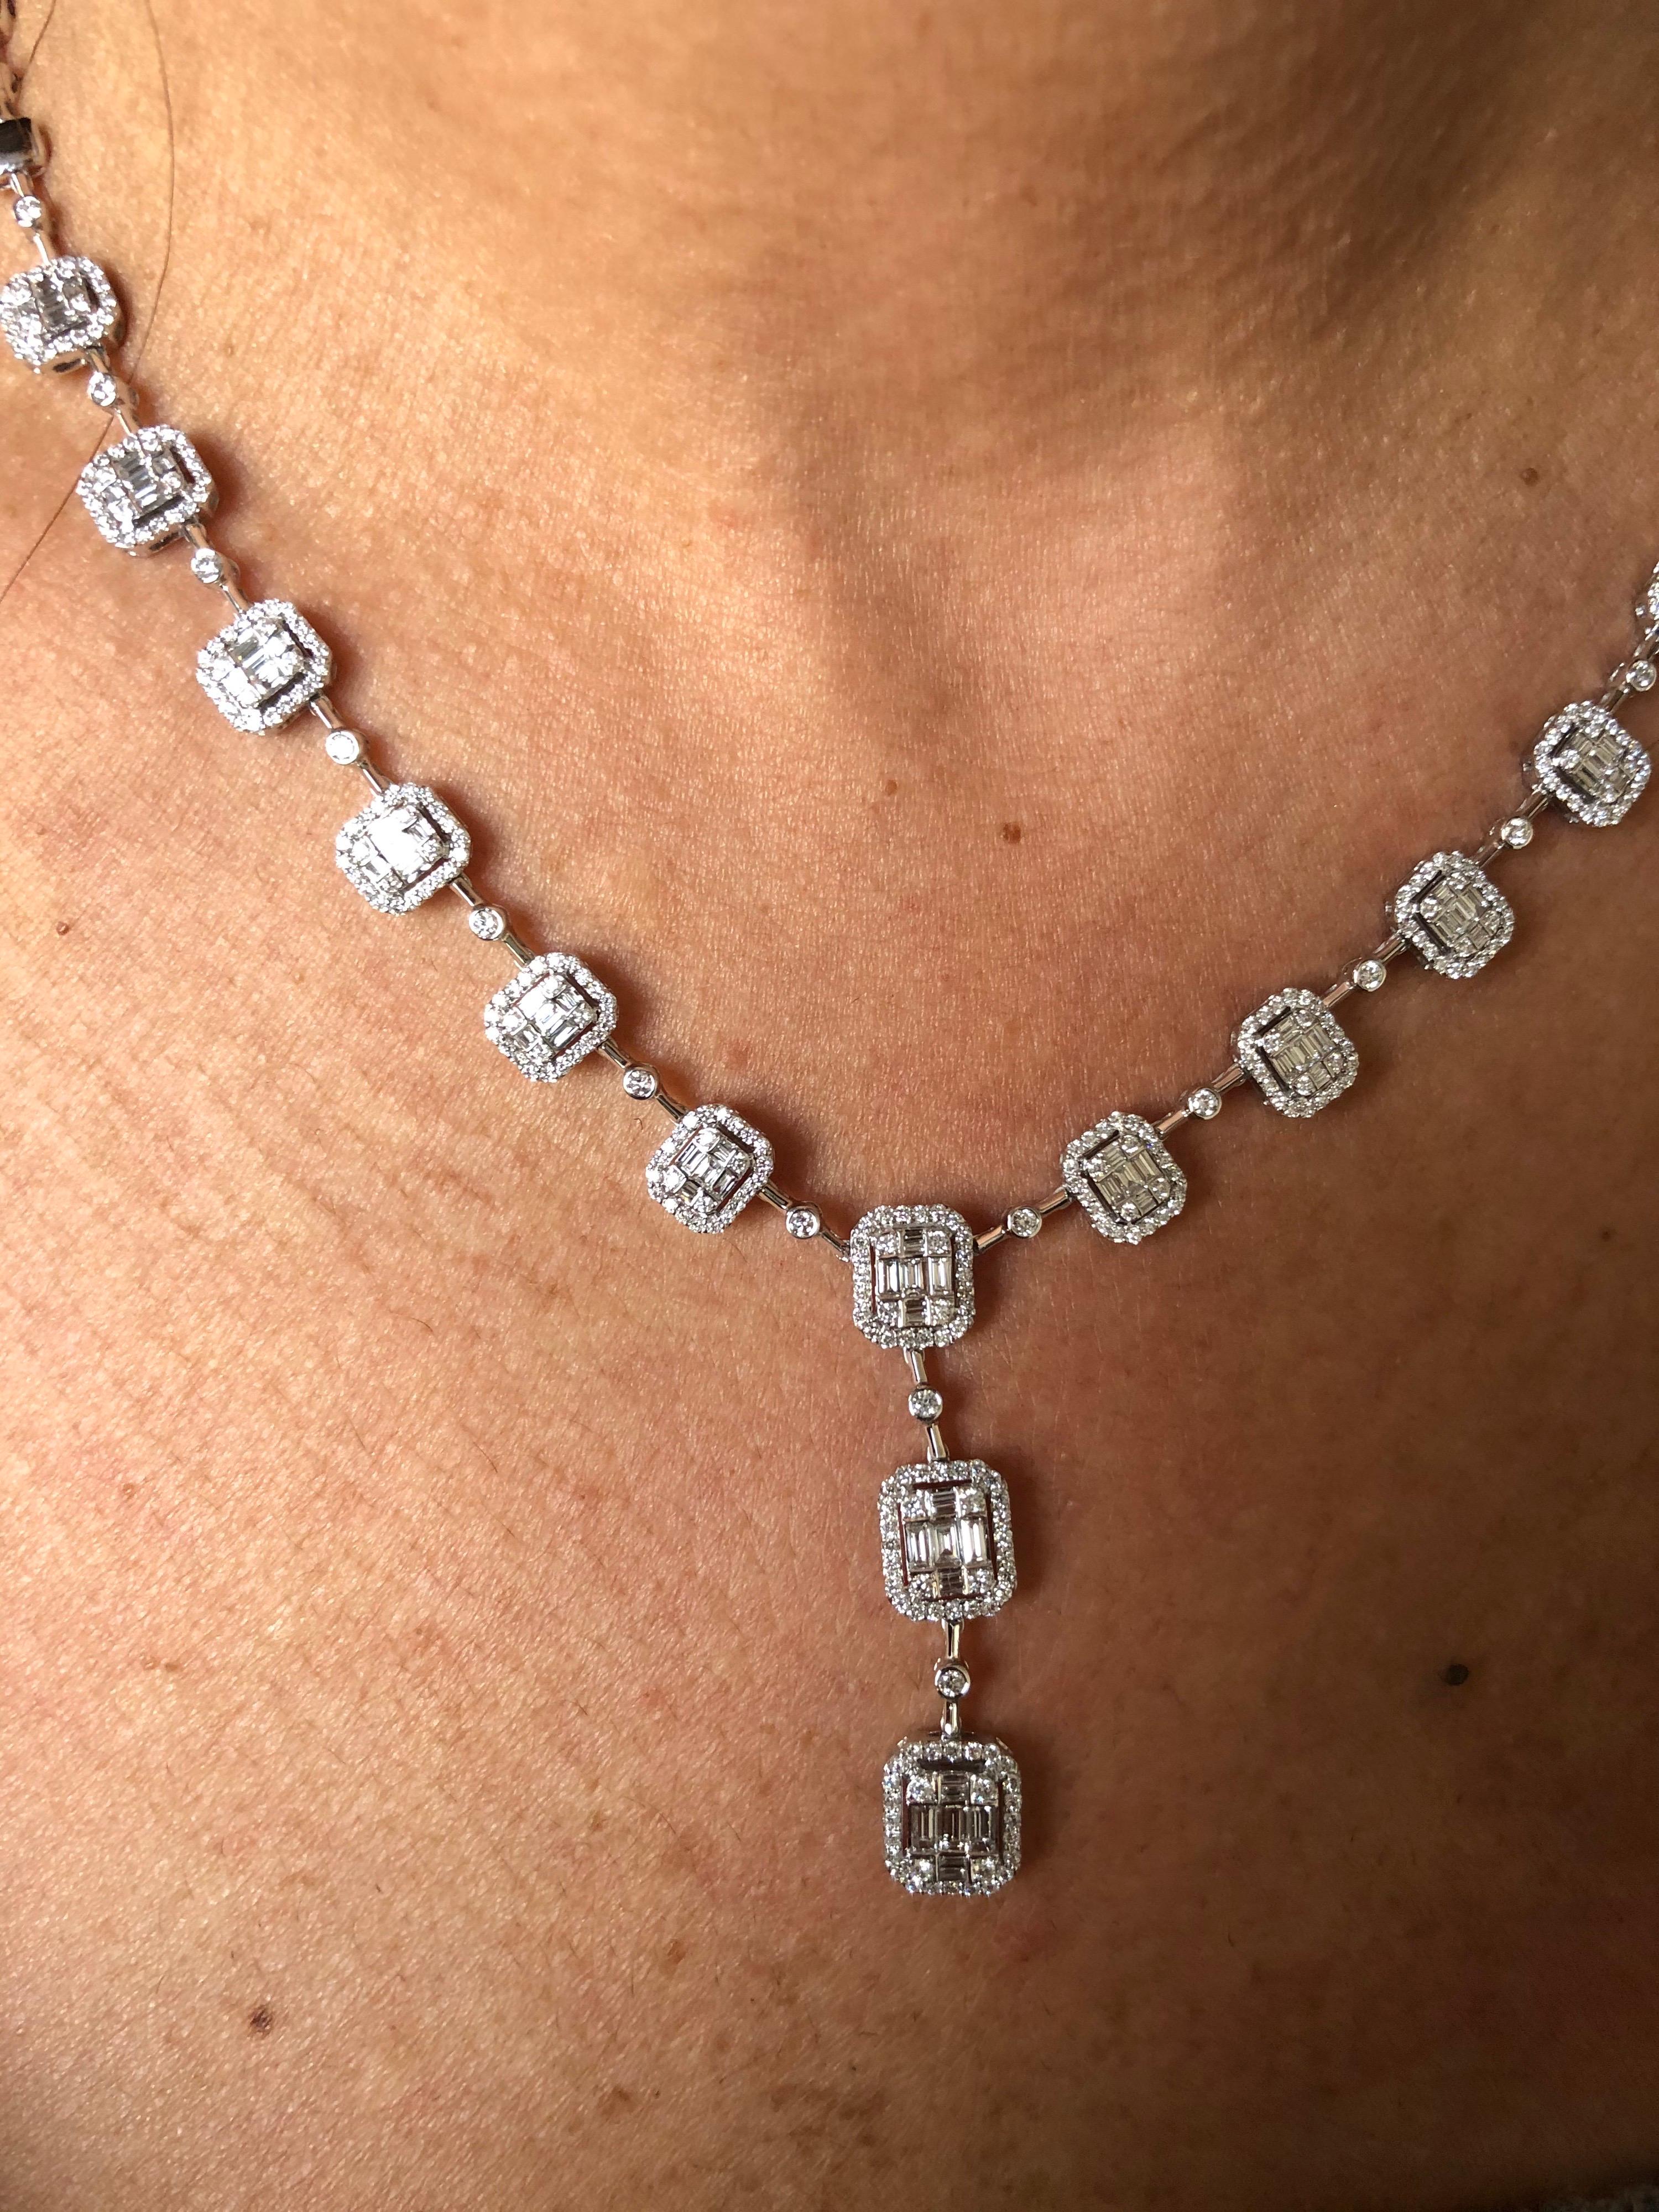 6.50 Carat Diamond Emerald Cut Necklace 18 Karat White In New Condition For Sale In Great Neck, NY